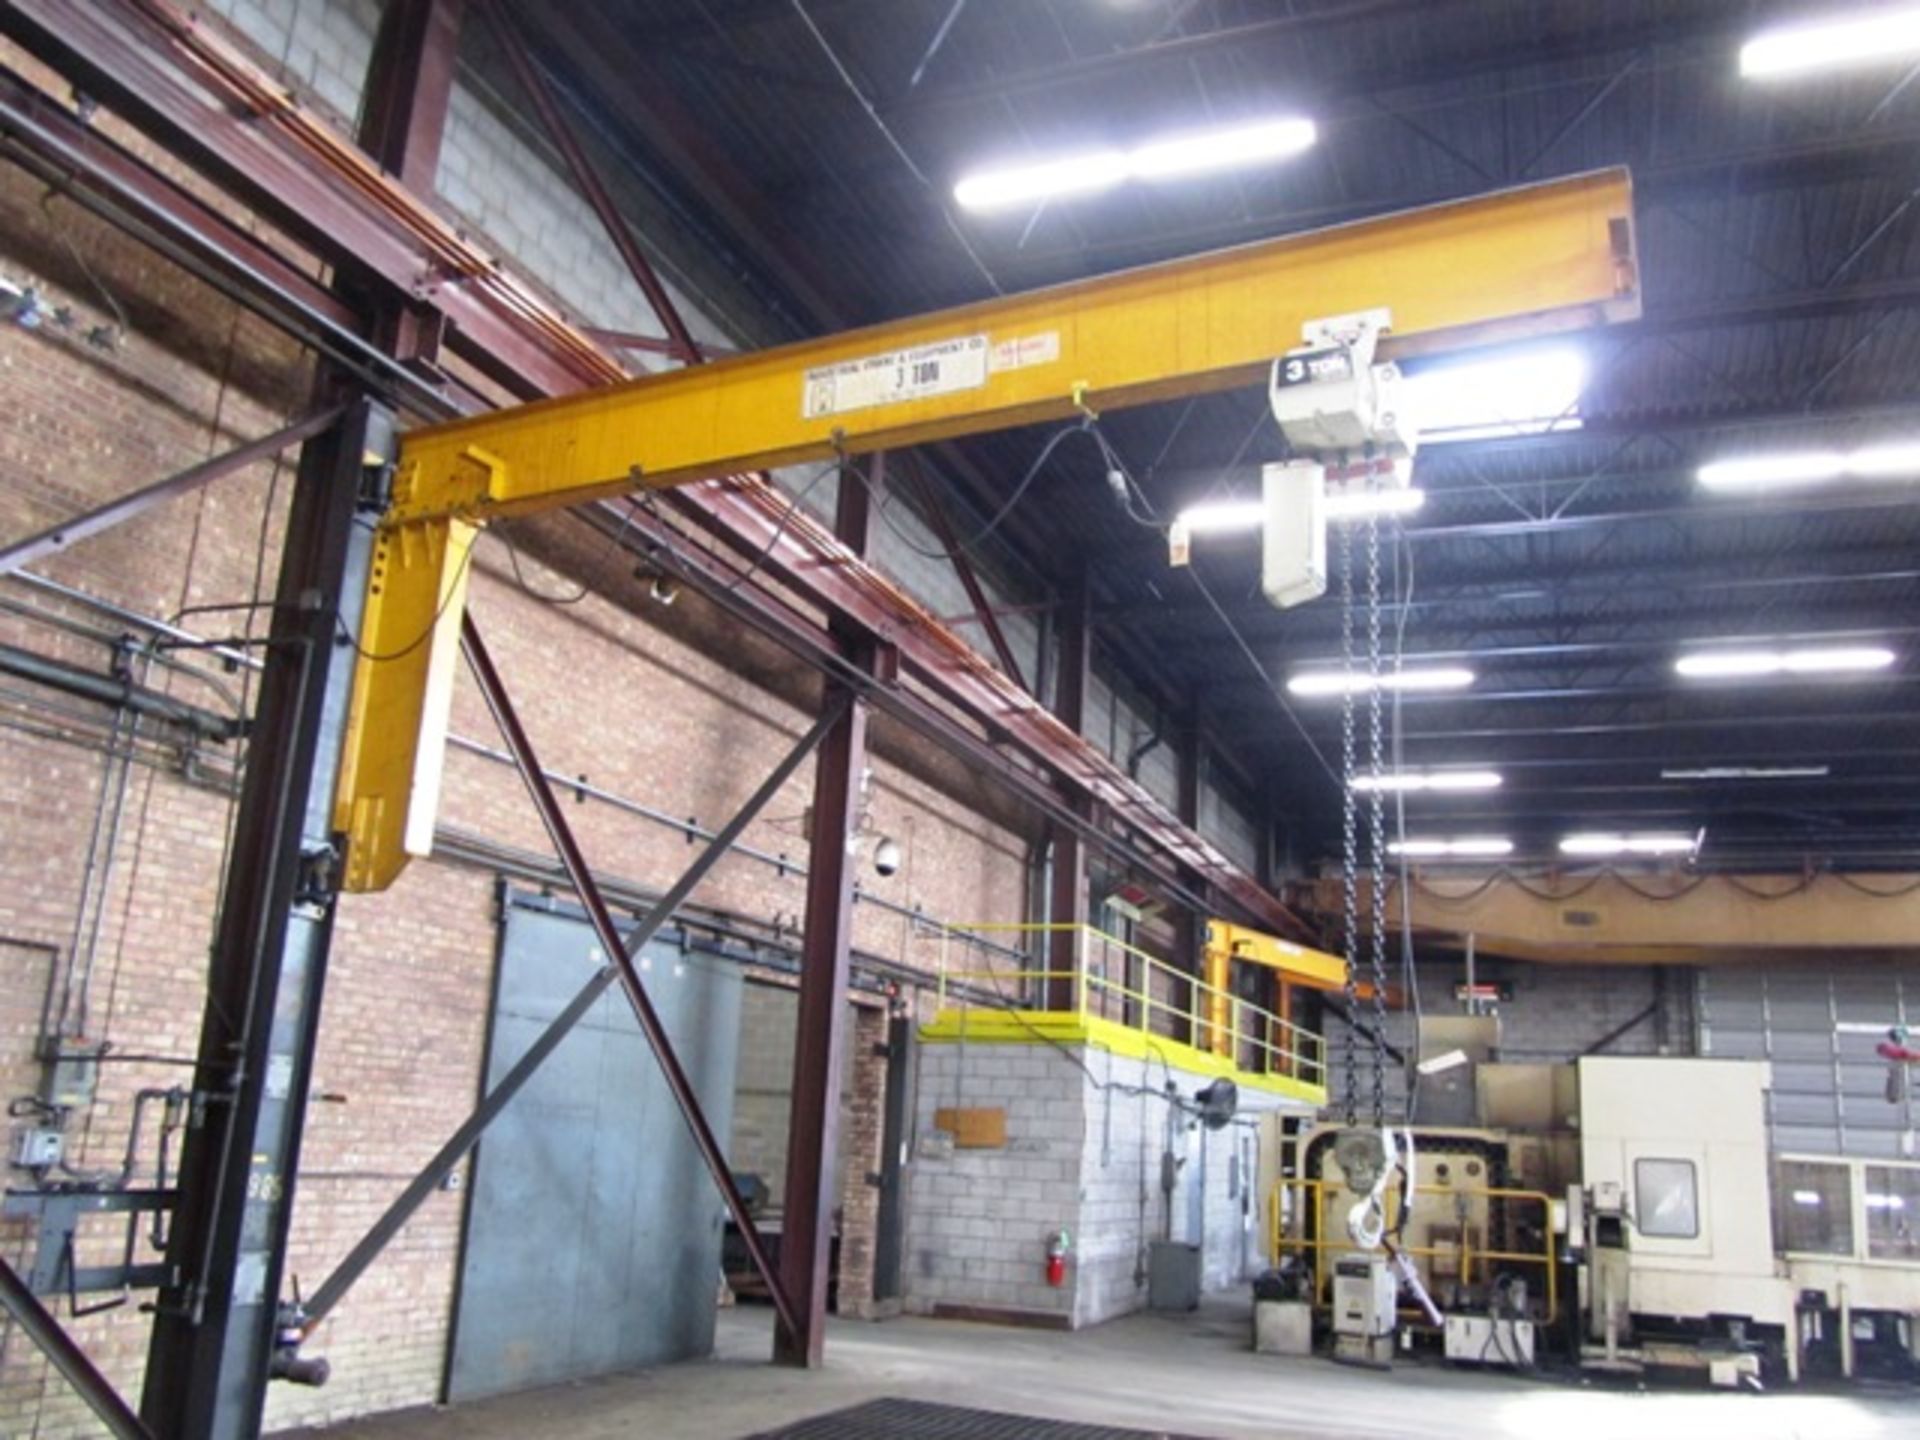 Industrial Crane 3 Ton Wall Mounted Jib Crane with Coffing 3 Ton Electric Hoist with Pendant